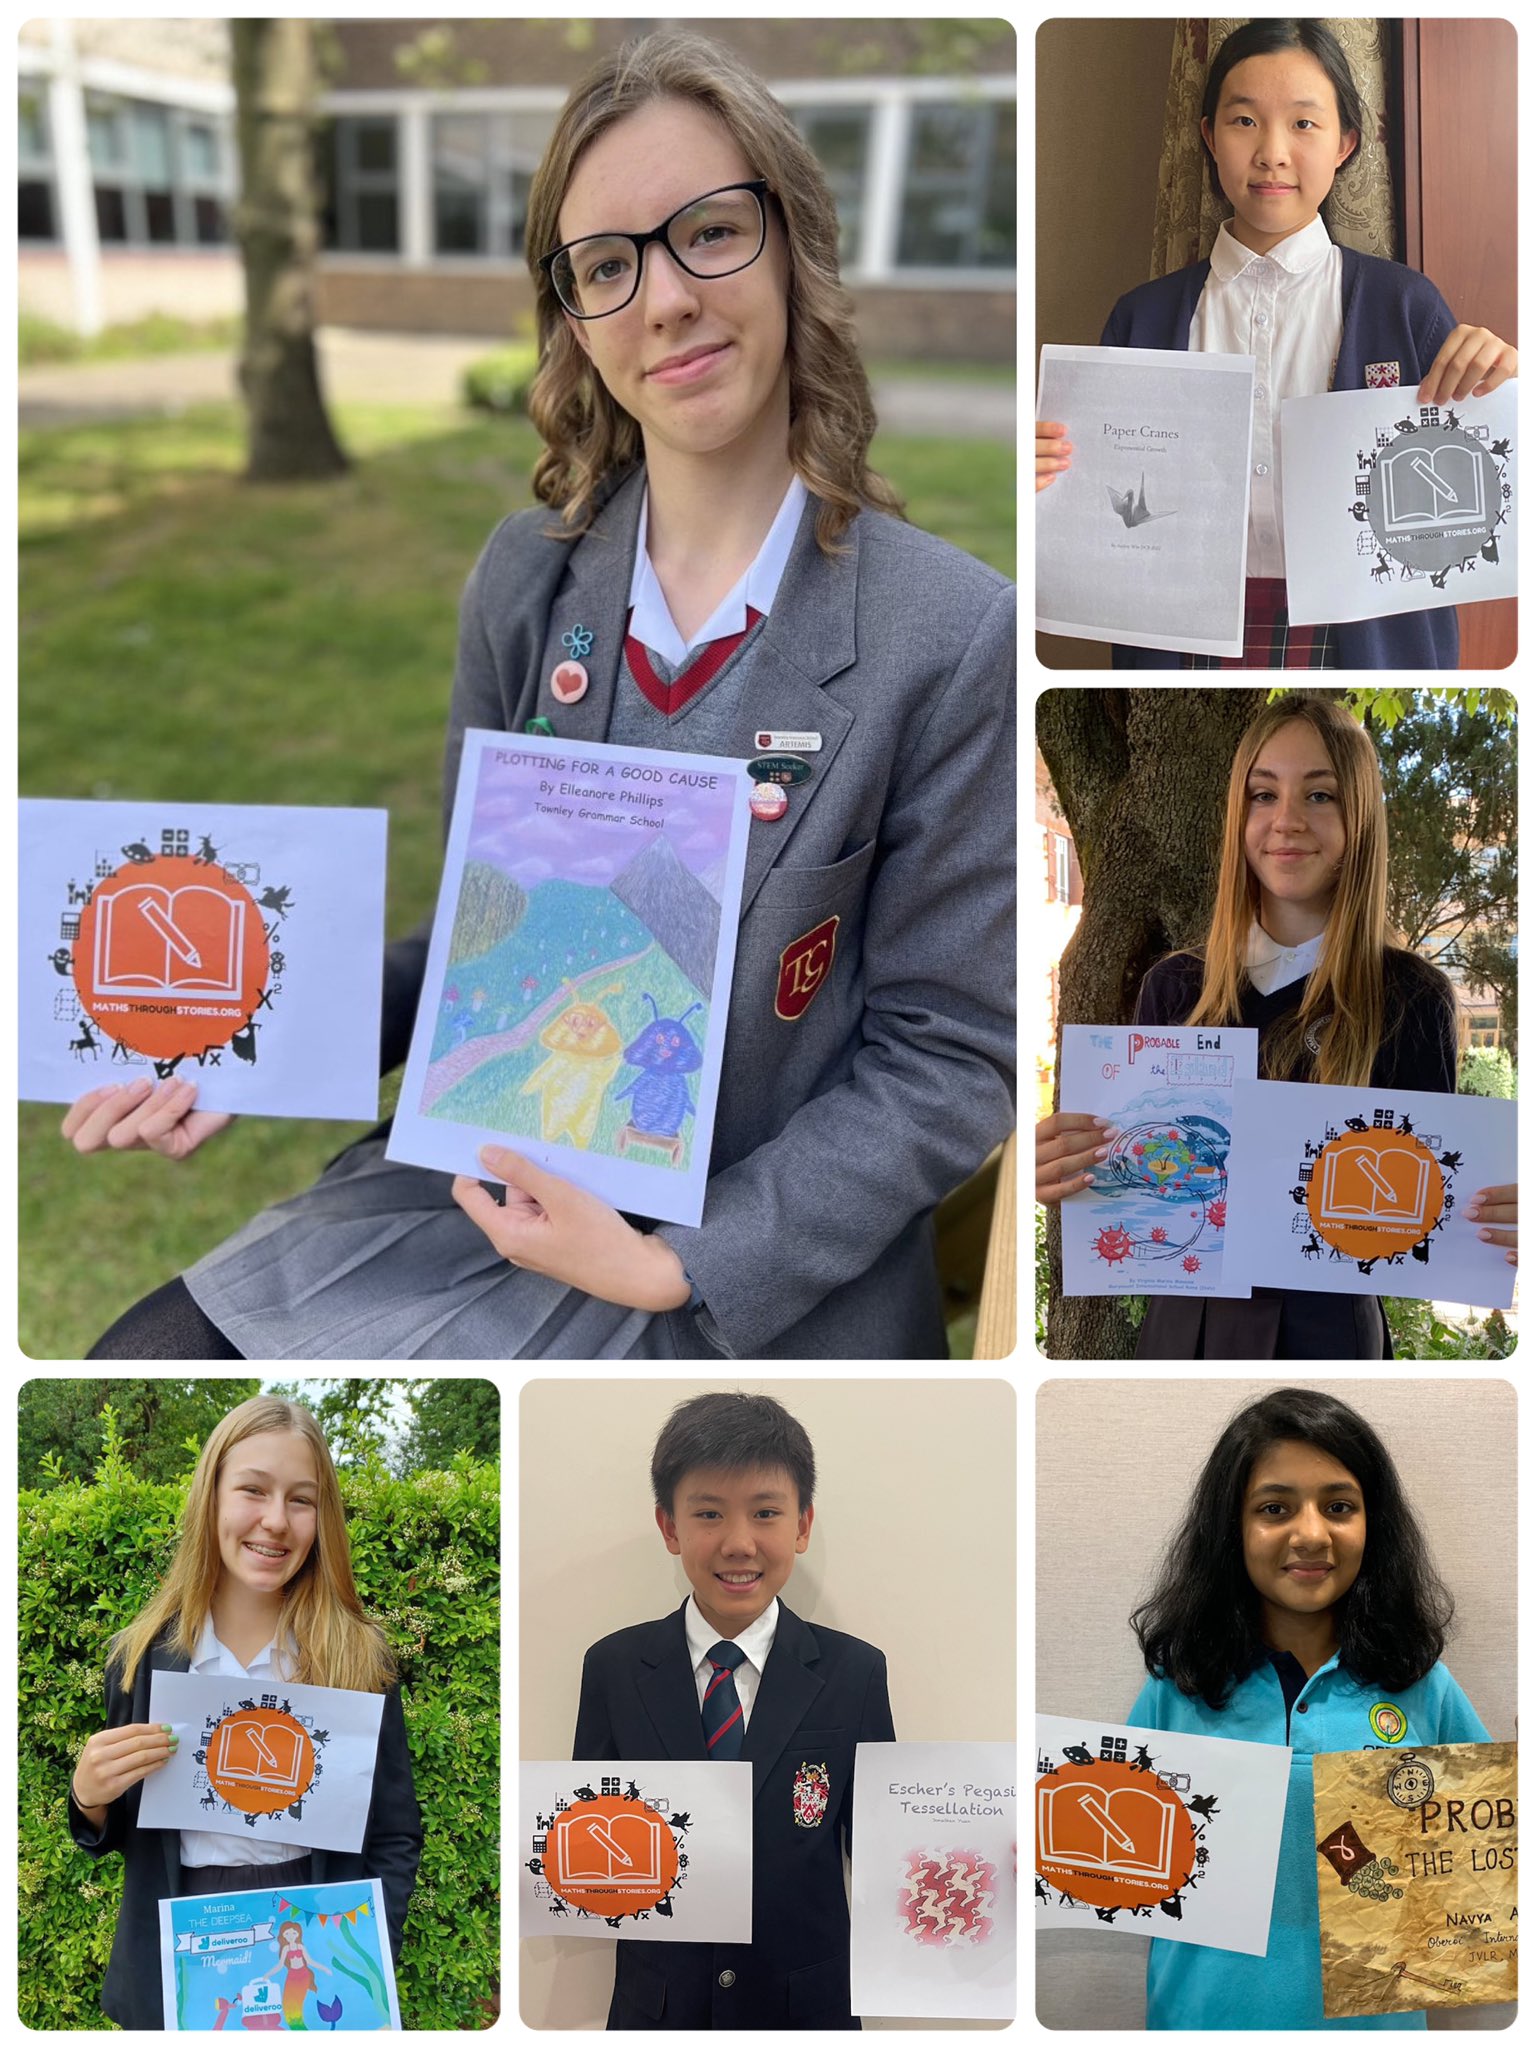 NEWS – 759 students across 10 countries took part in this year’s Young Mathematical Story Author (YMSA) competition organised by Dr. Natthapoj Vincent Trakulphadetkrai (Associate Professor of Mathematics Education, University of Reading)